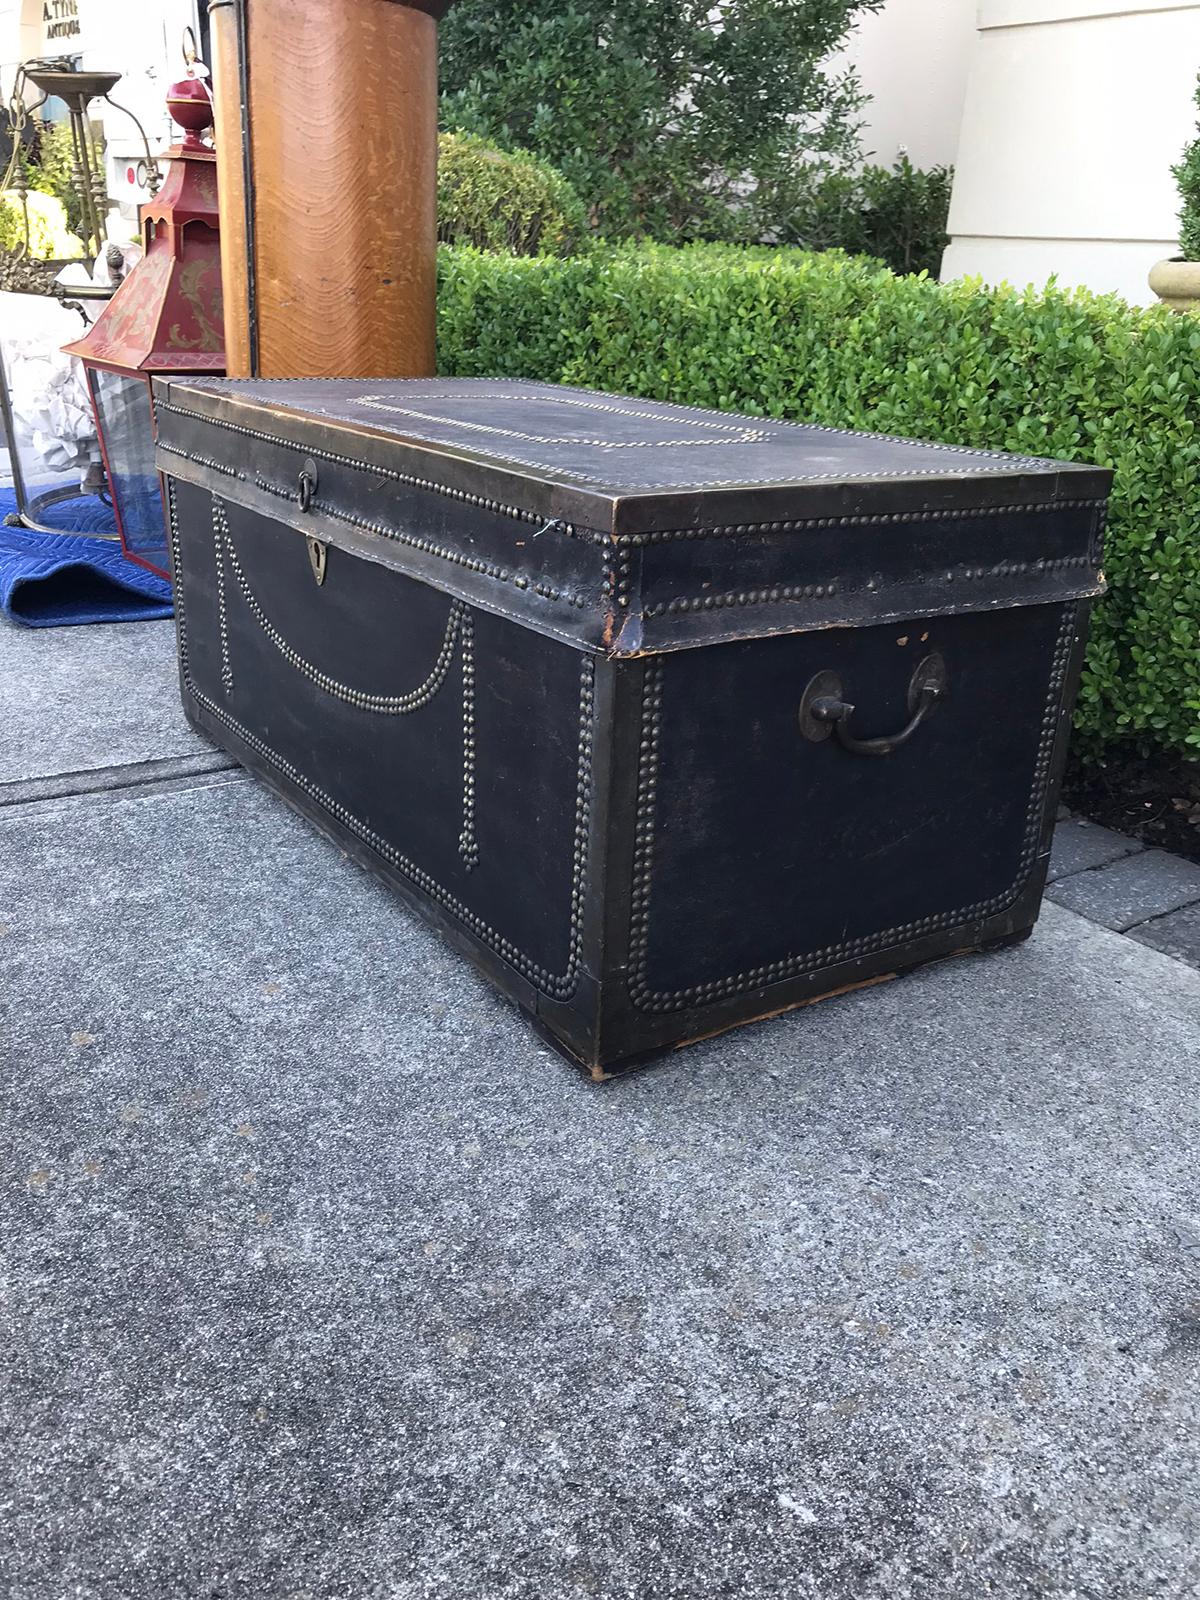 English Regency Camphor Wood and Black Leather Covered Trunk, circa 1810s-1820s In Good Condition For Sale In Atlanta, GA